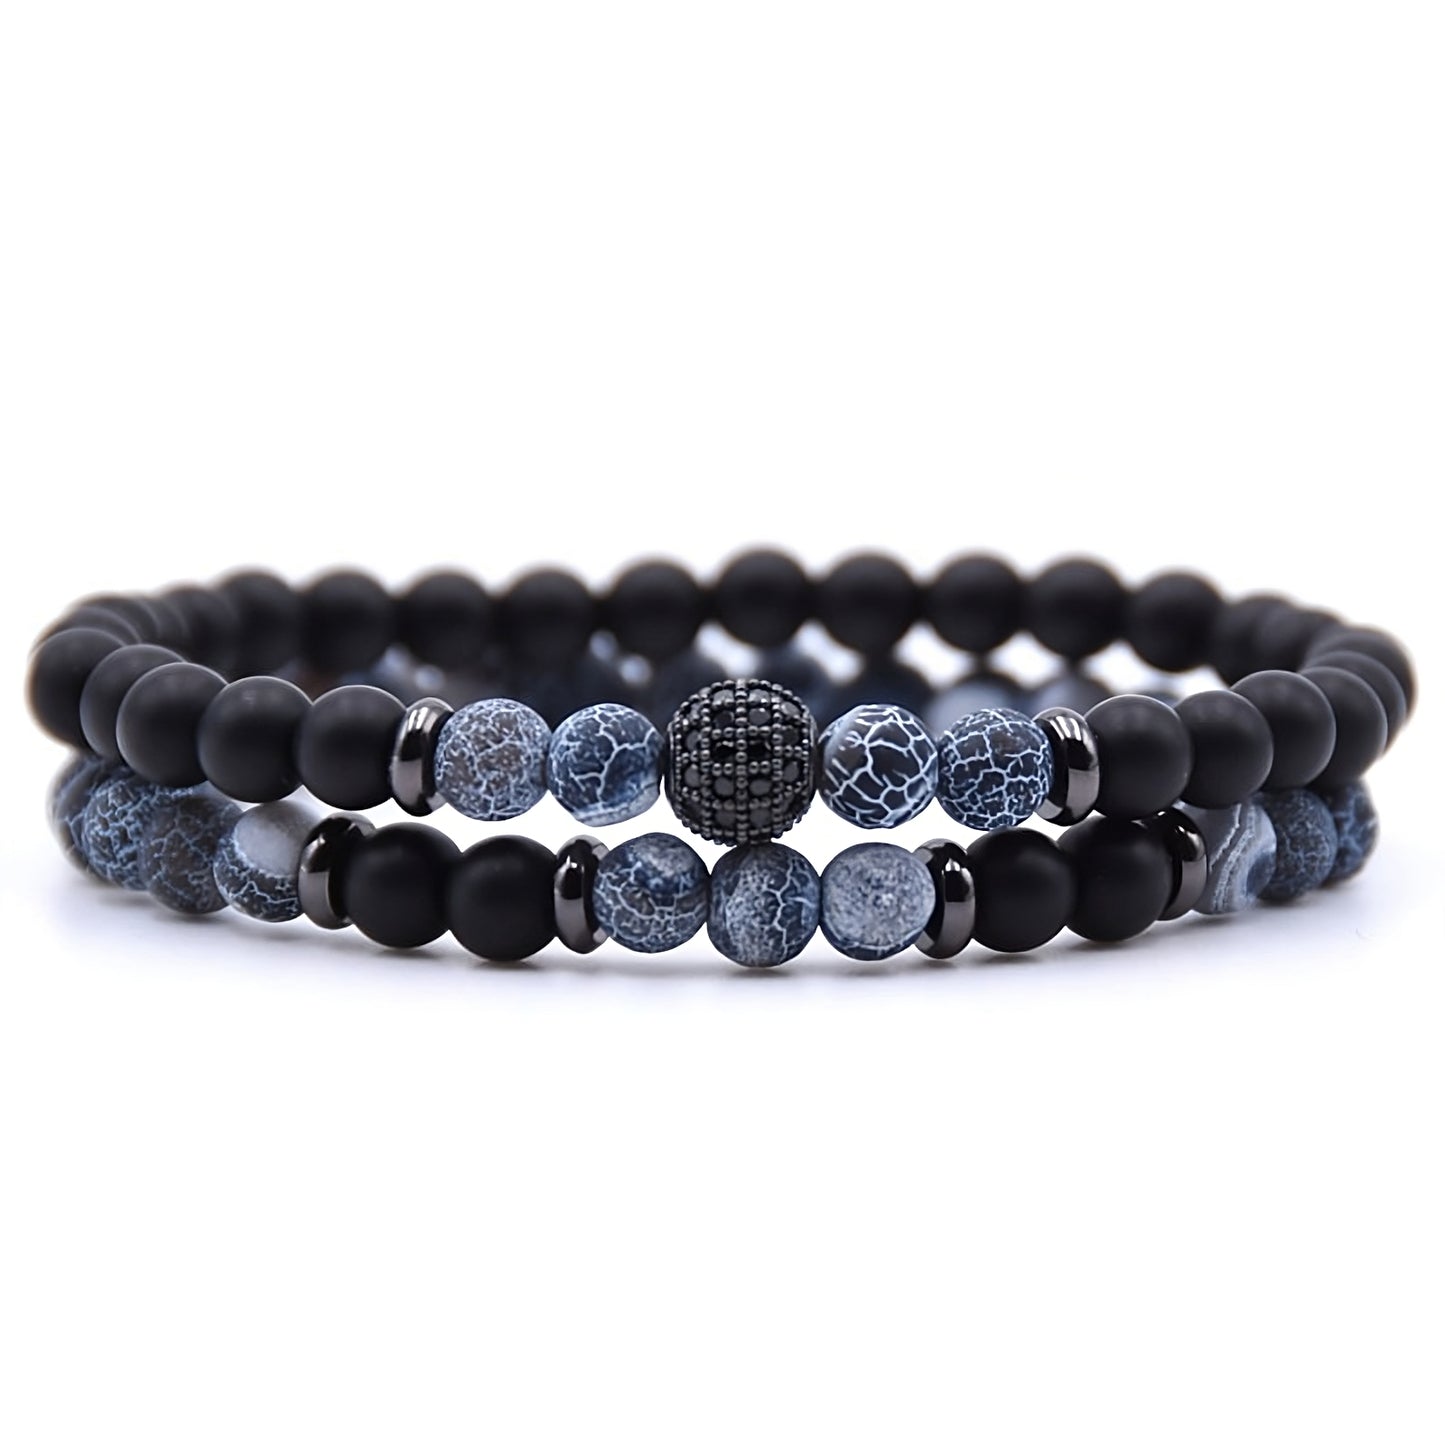 Luxury Micro-inlaid Zircon Bracelet with Natural Stone Beads | Handcrafted Jewelry - VHD